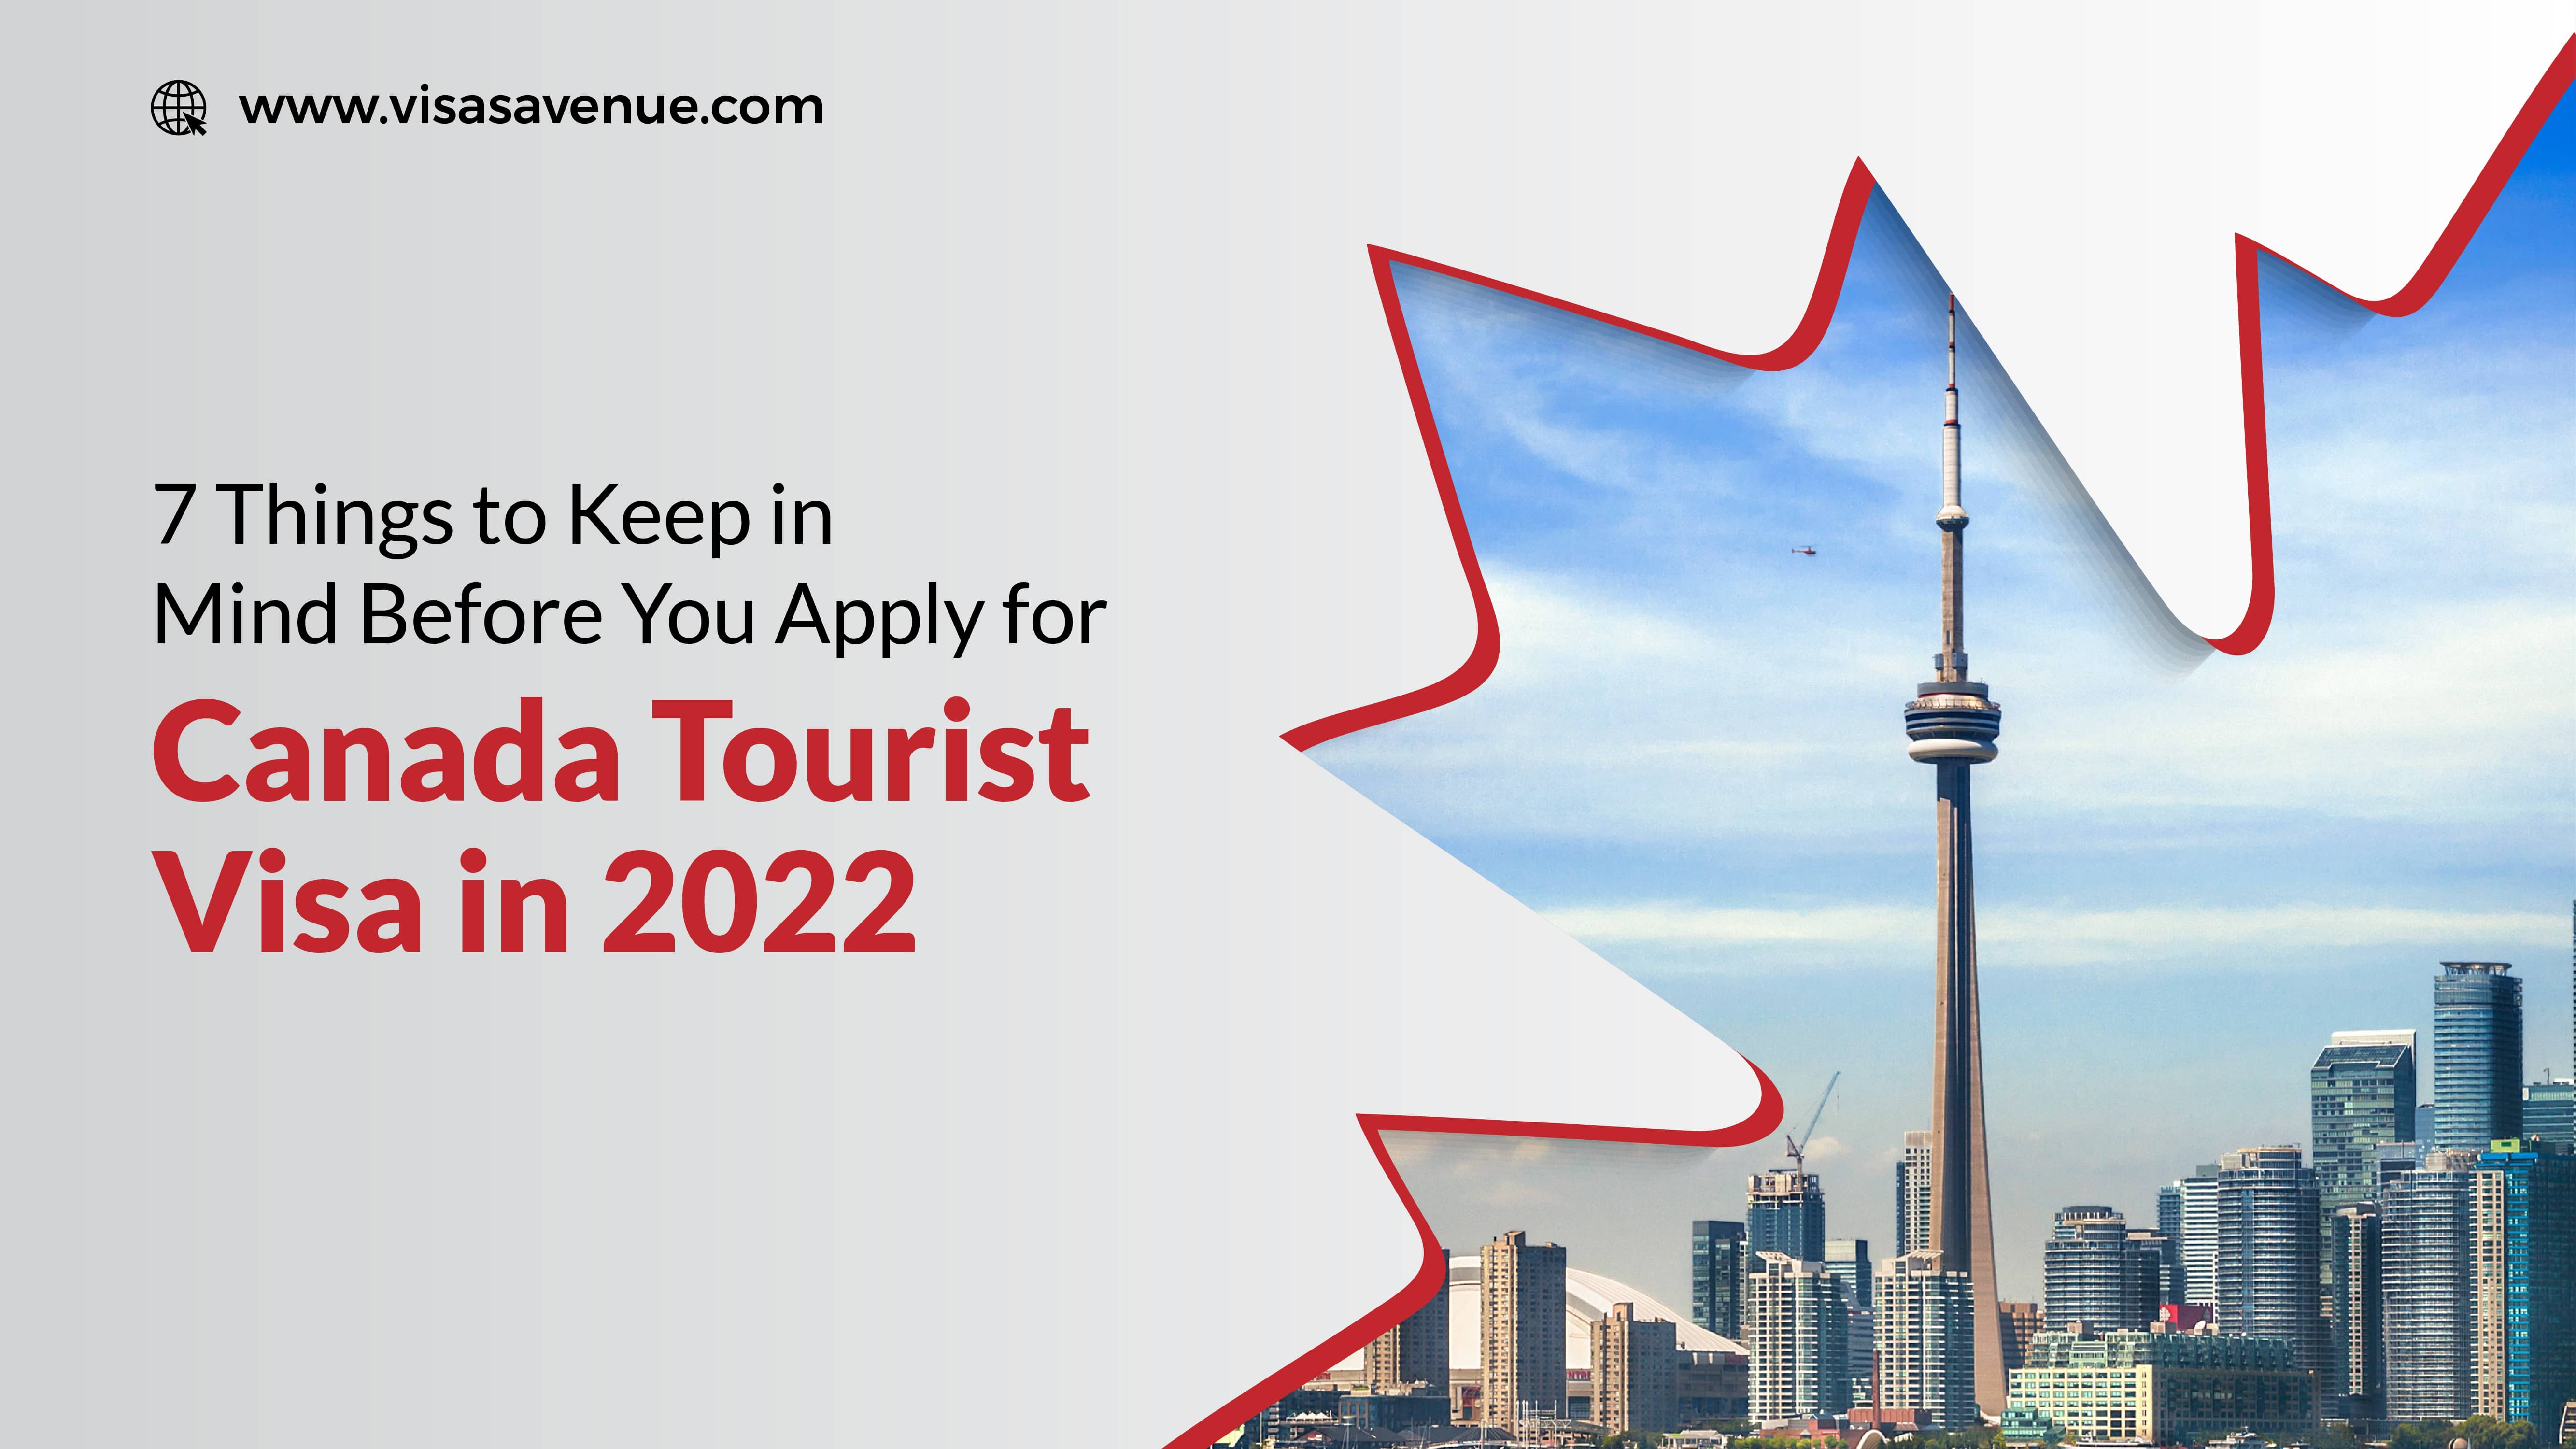 7 Things to Keep in Mind Before You Apply for Canada Tourist Visa in 2022